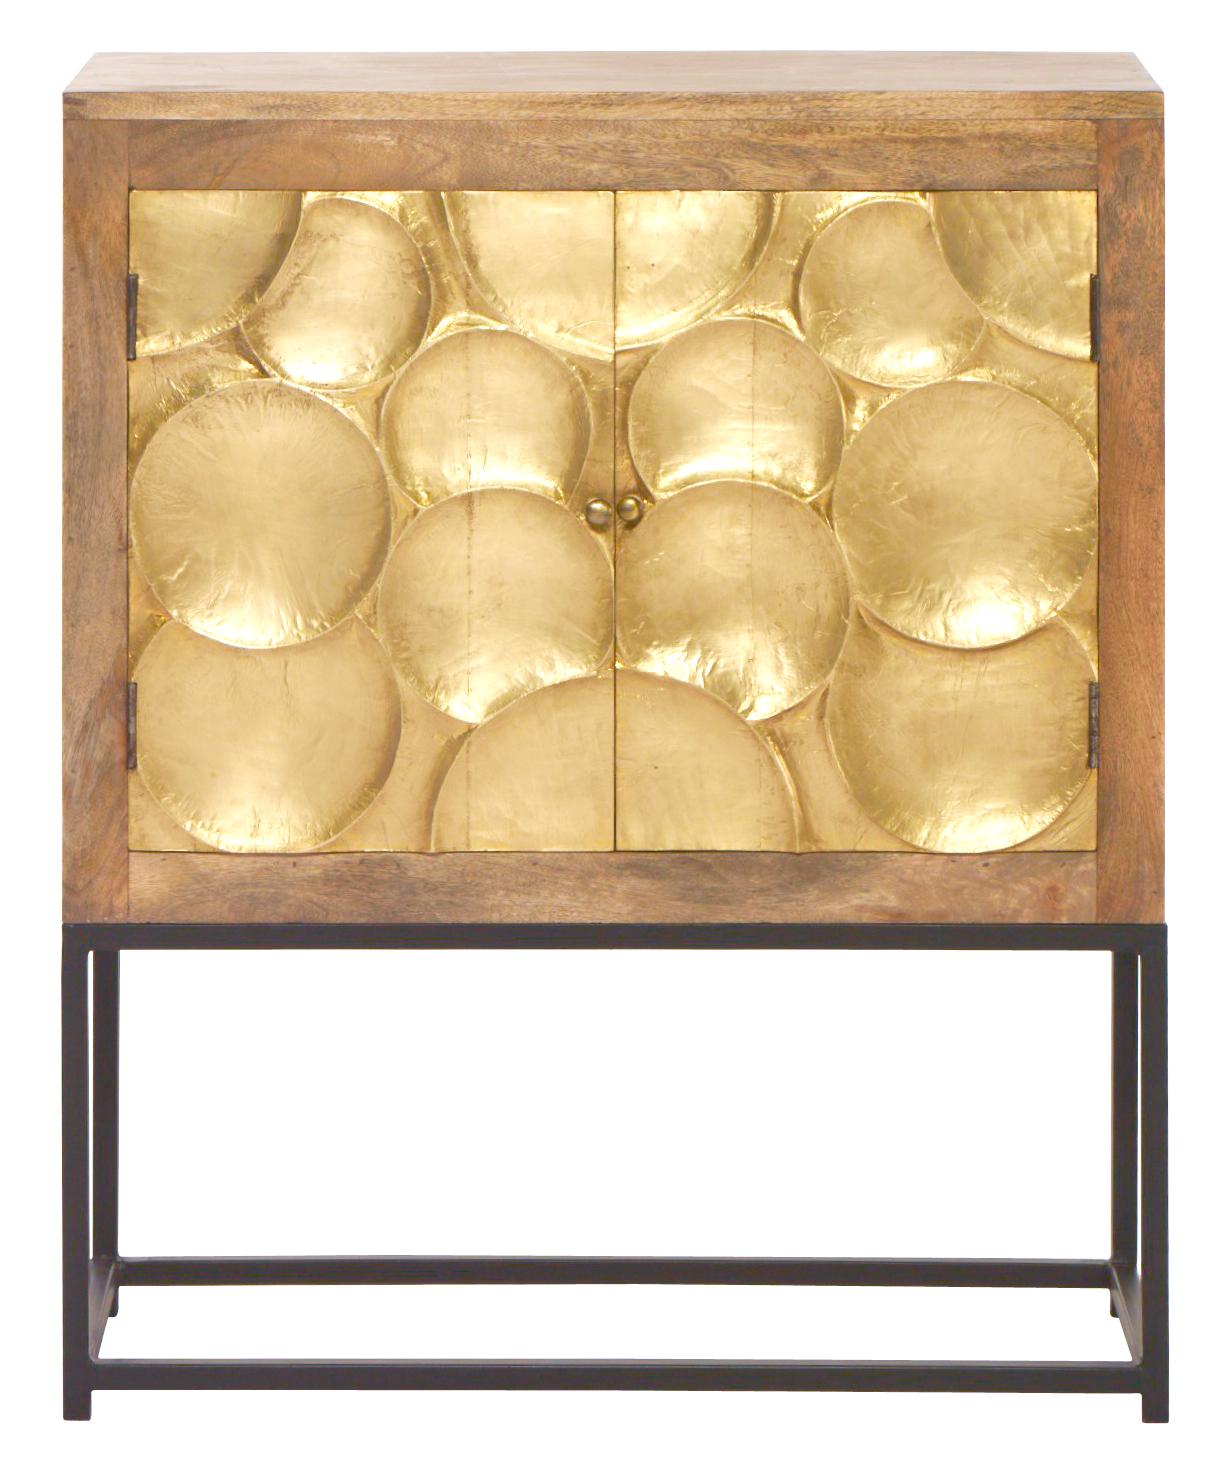 Contemporary Cabinet UCS-6825 Capiz Refinement UCS-6825 in Brass, Natural 